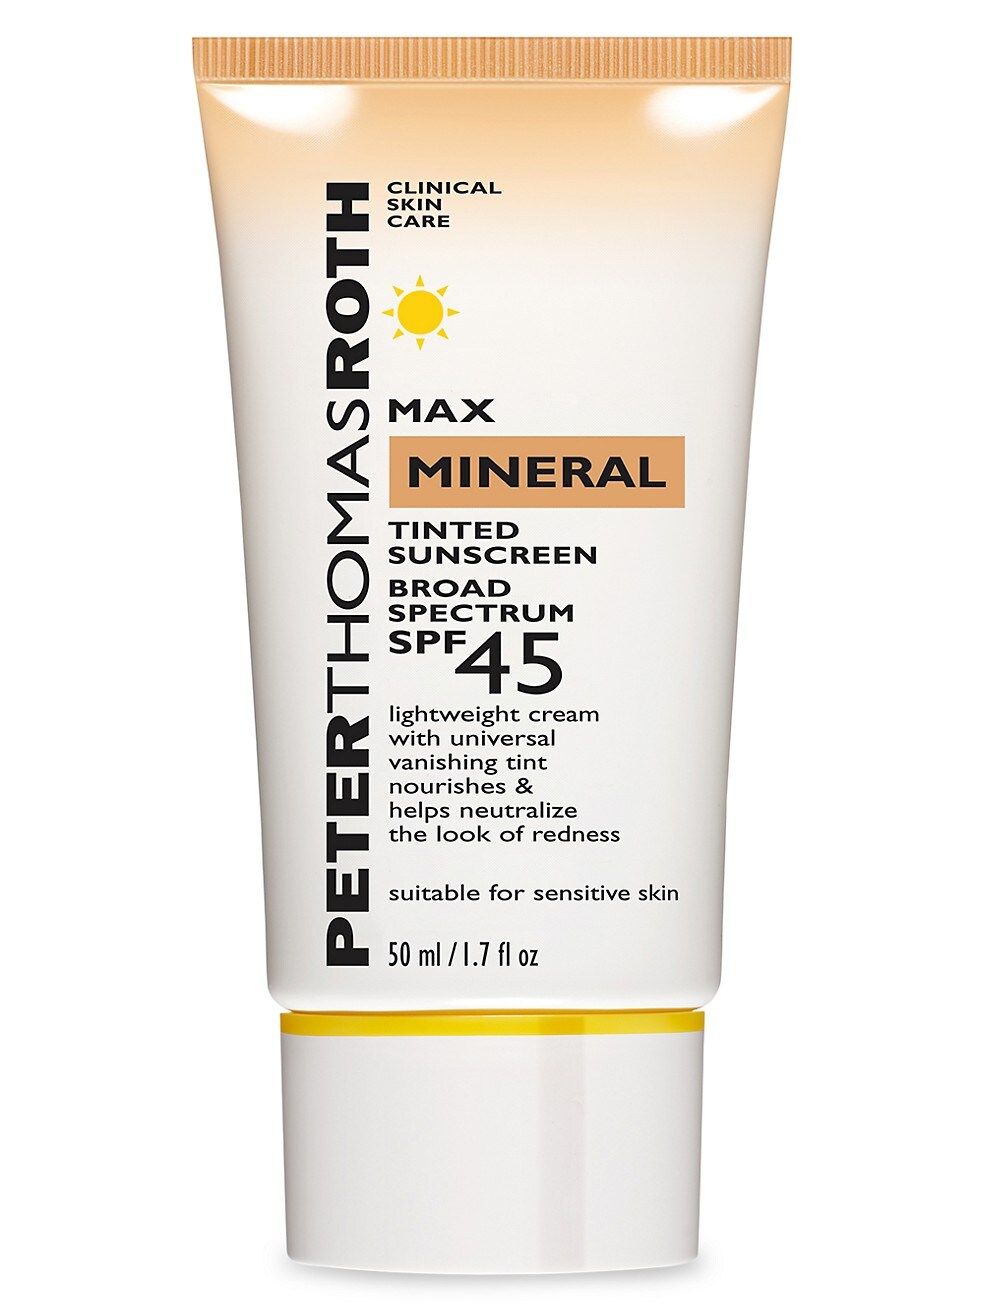 Max Mineral Tinted Sunscreen Broad Spectrum SPF 45 | Saks Fifth Avenue